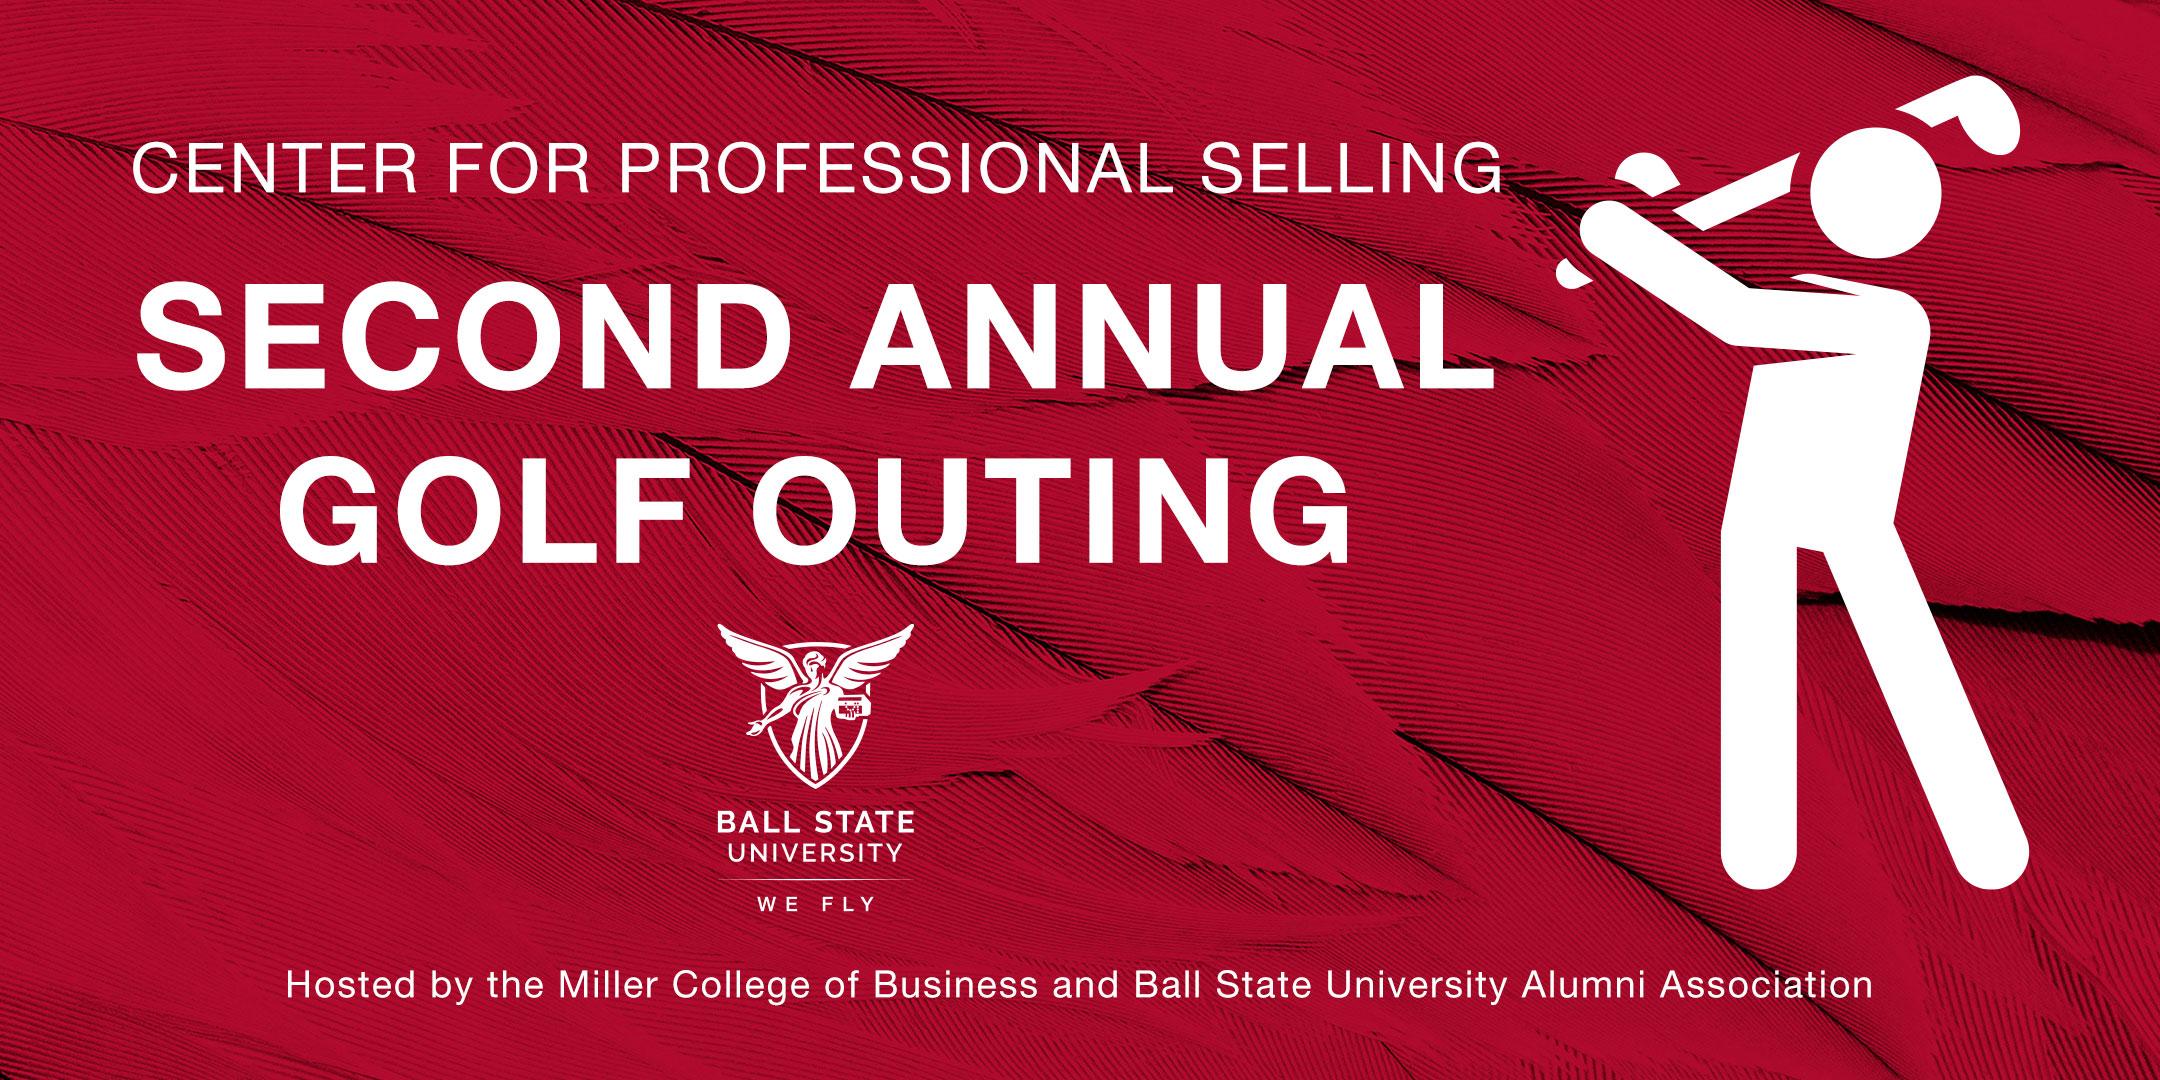 Center for Professional Selling Second Annual Golf Outing